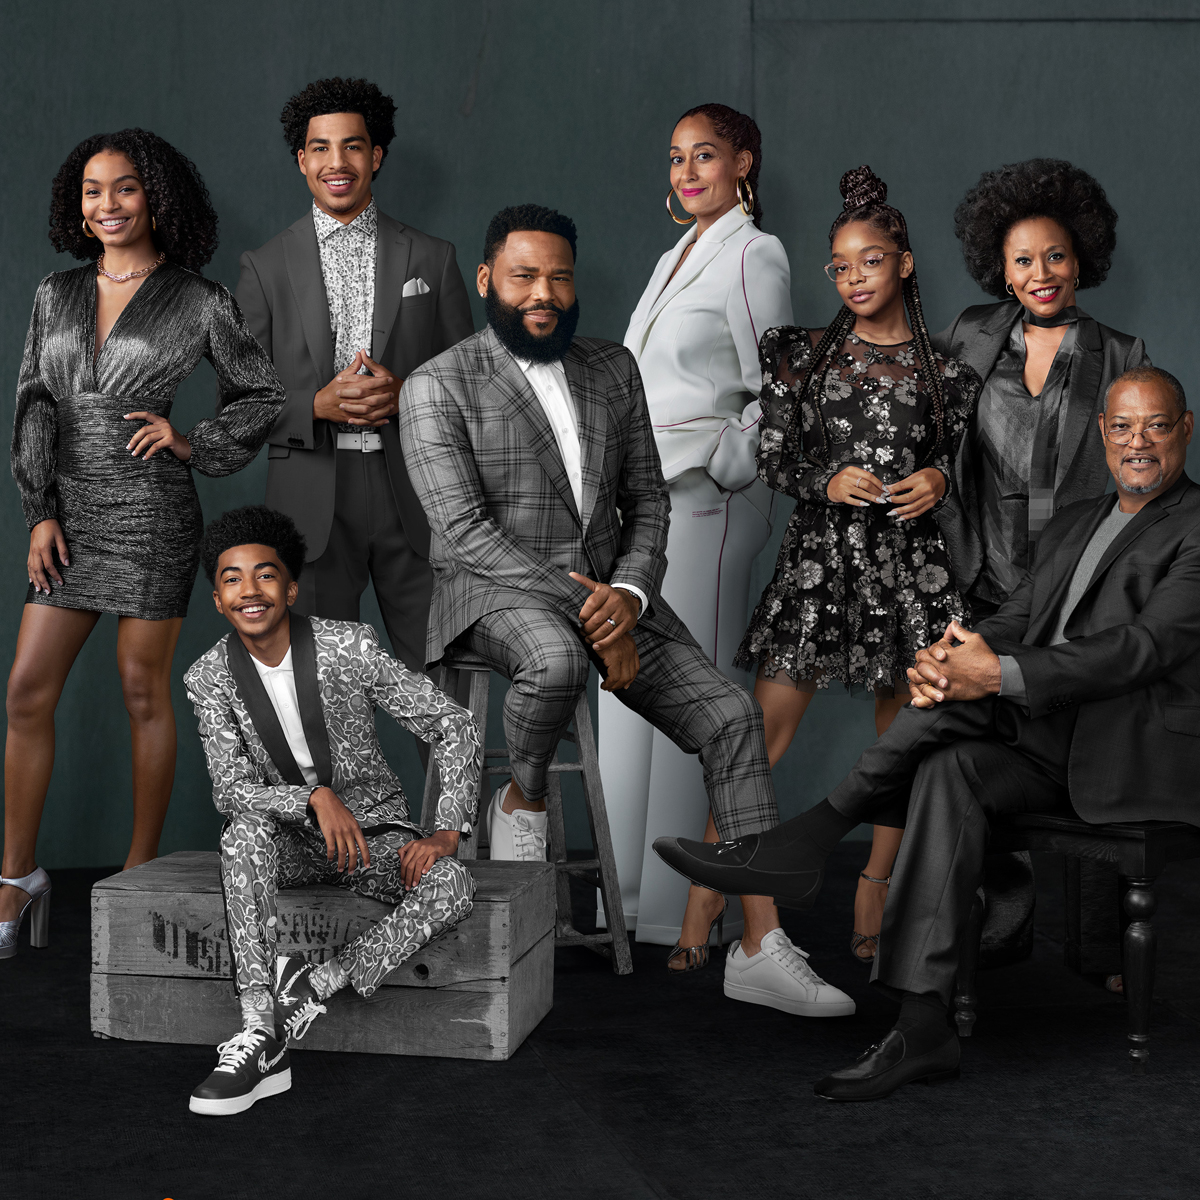 https://akns-images.eonline.com/eol_images/Entire_Site/2022314/rs_1200x1200-220414155418-1200-5anthony-anderson-tracee-ellis-ross-blackish.jpg?fit=around%7C1200:1200&output-quality=90&crop=1200:1200;center,top